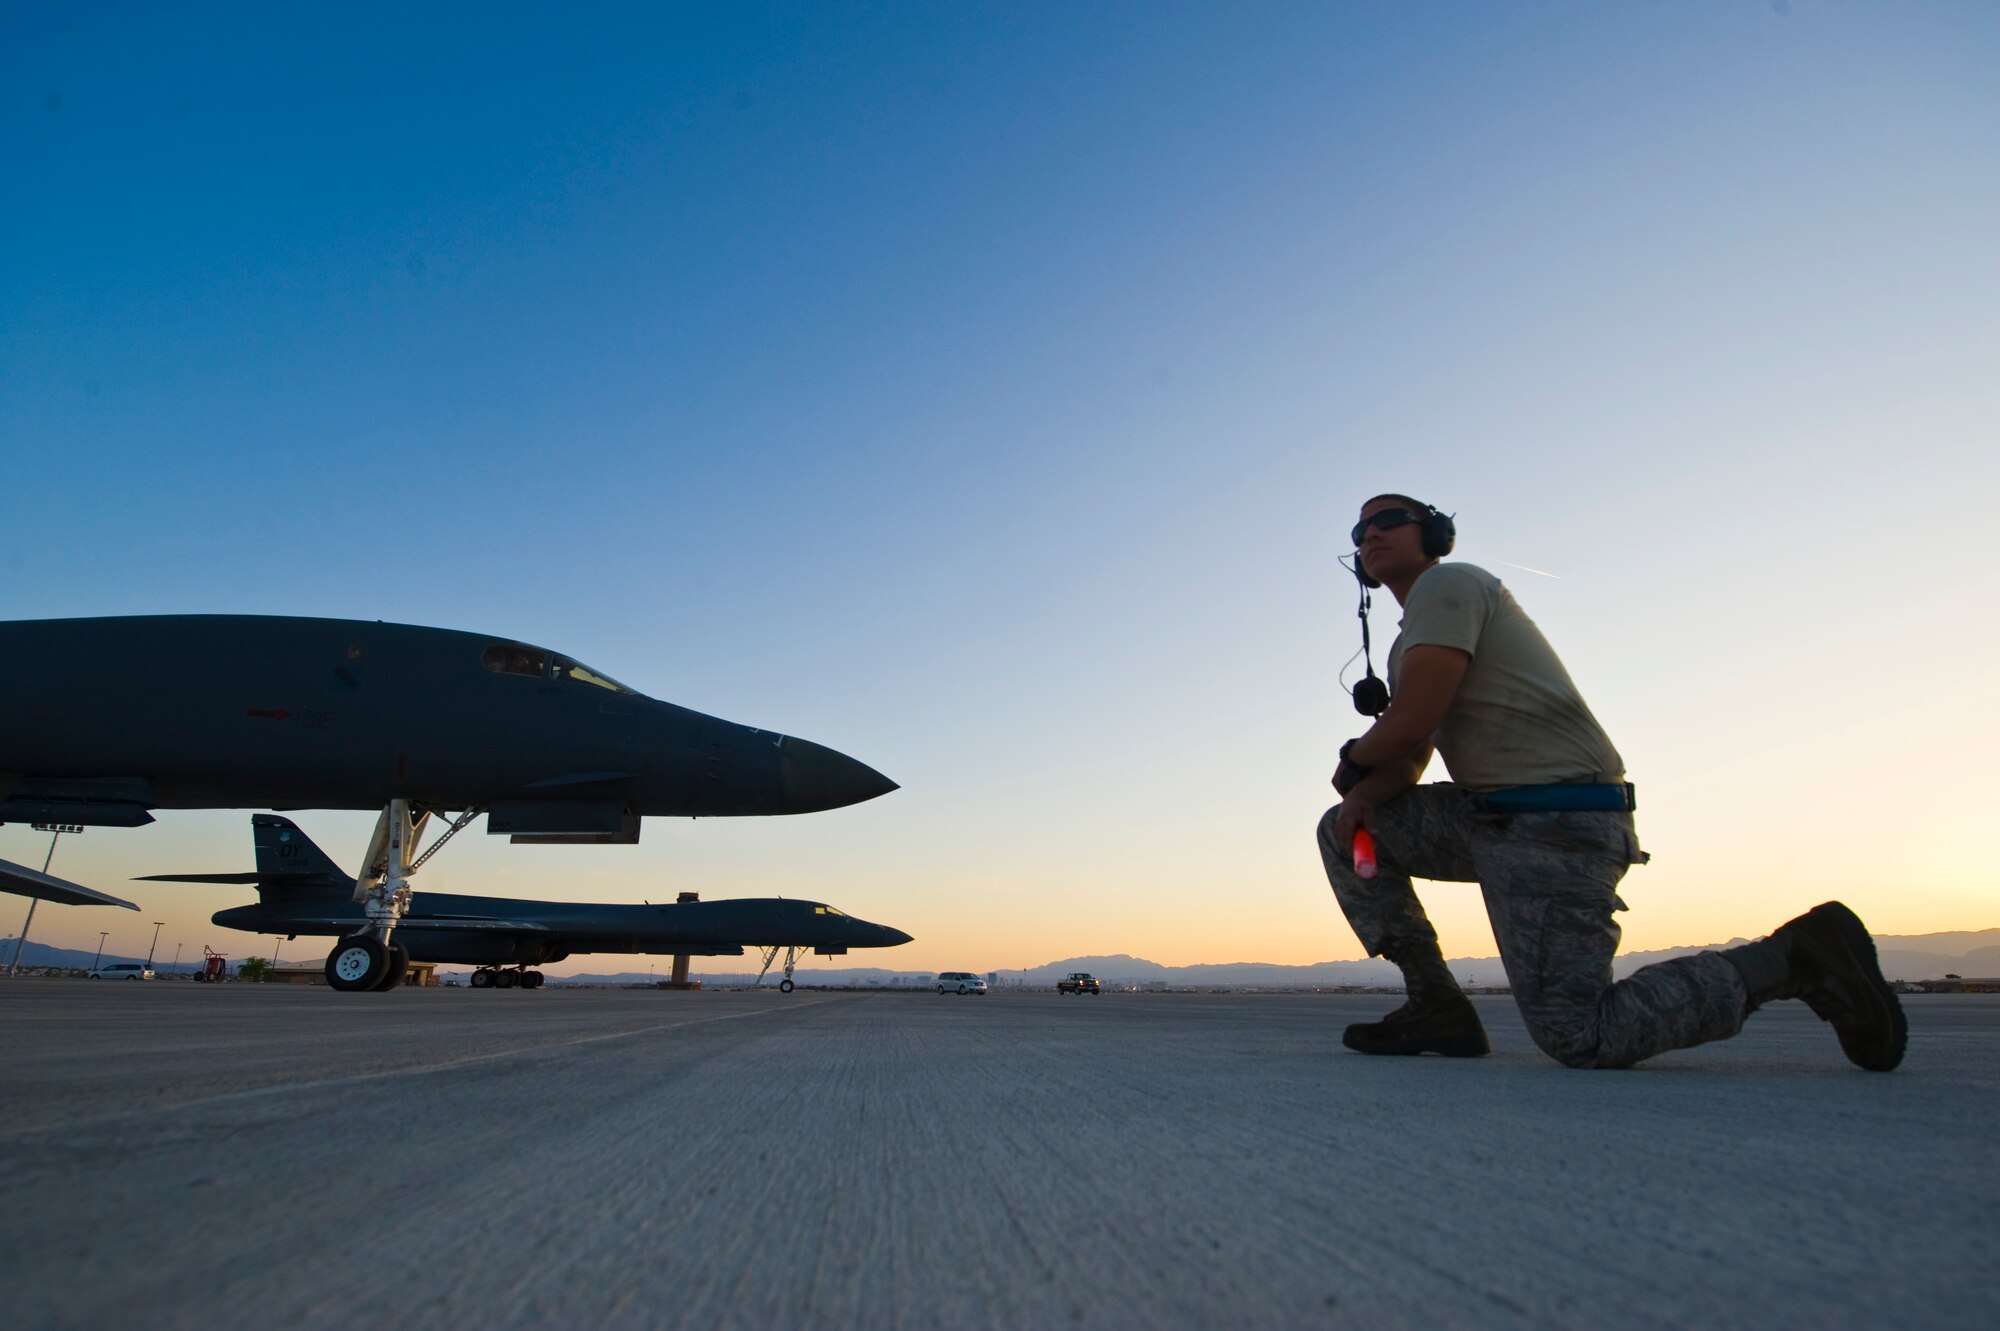 Senior Airman Ellery Lopez, 7th Aircraft Maintenance Squadron crew chief, waits to signal out a B-1B Lancer assigned to the 7th Bomb Wing, Dyess Air Force Base, Texas during Green Flag 14-6 April 24, 2014, at Nellis Air Force Base, Nev. The Green Flag exercise provides aircrew and maintainers training during simulated warfare conditions. (U.S. Air Force photo by Senior Airman Christopher Tam)